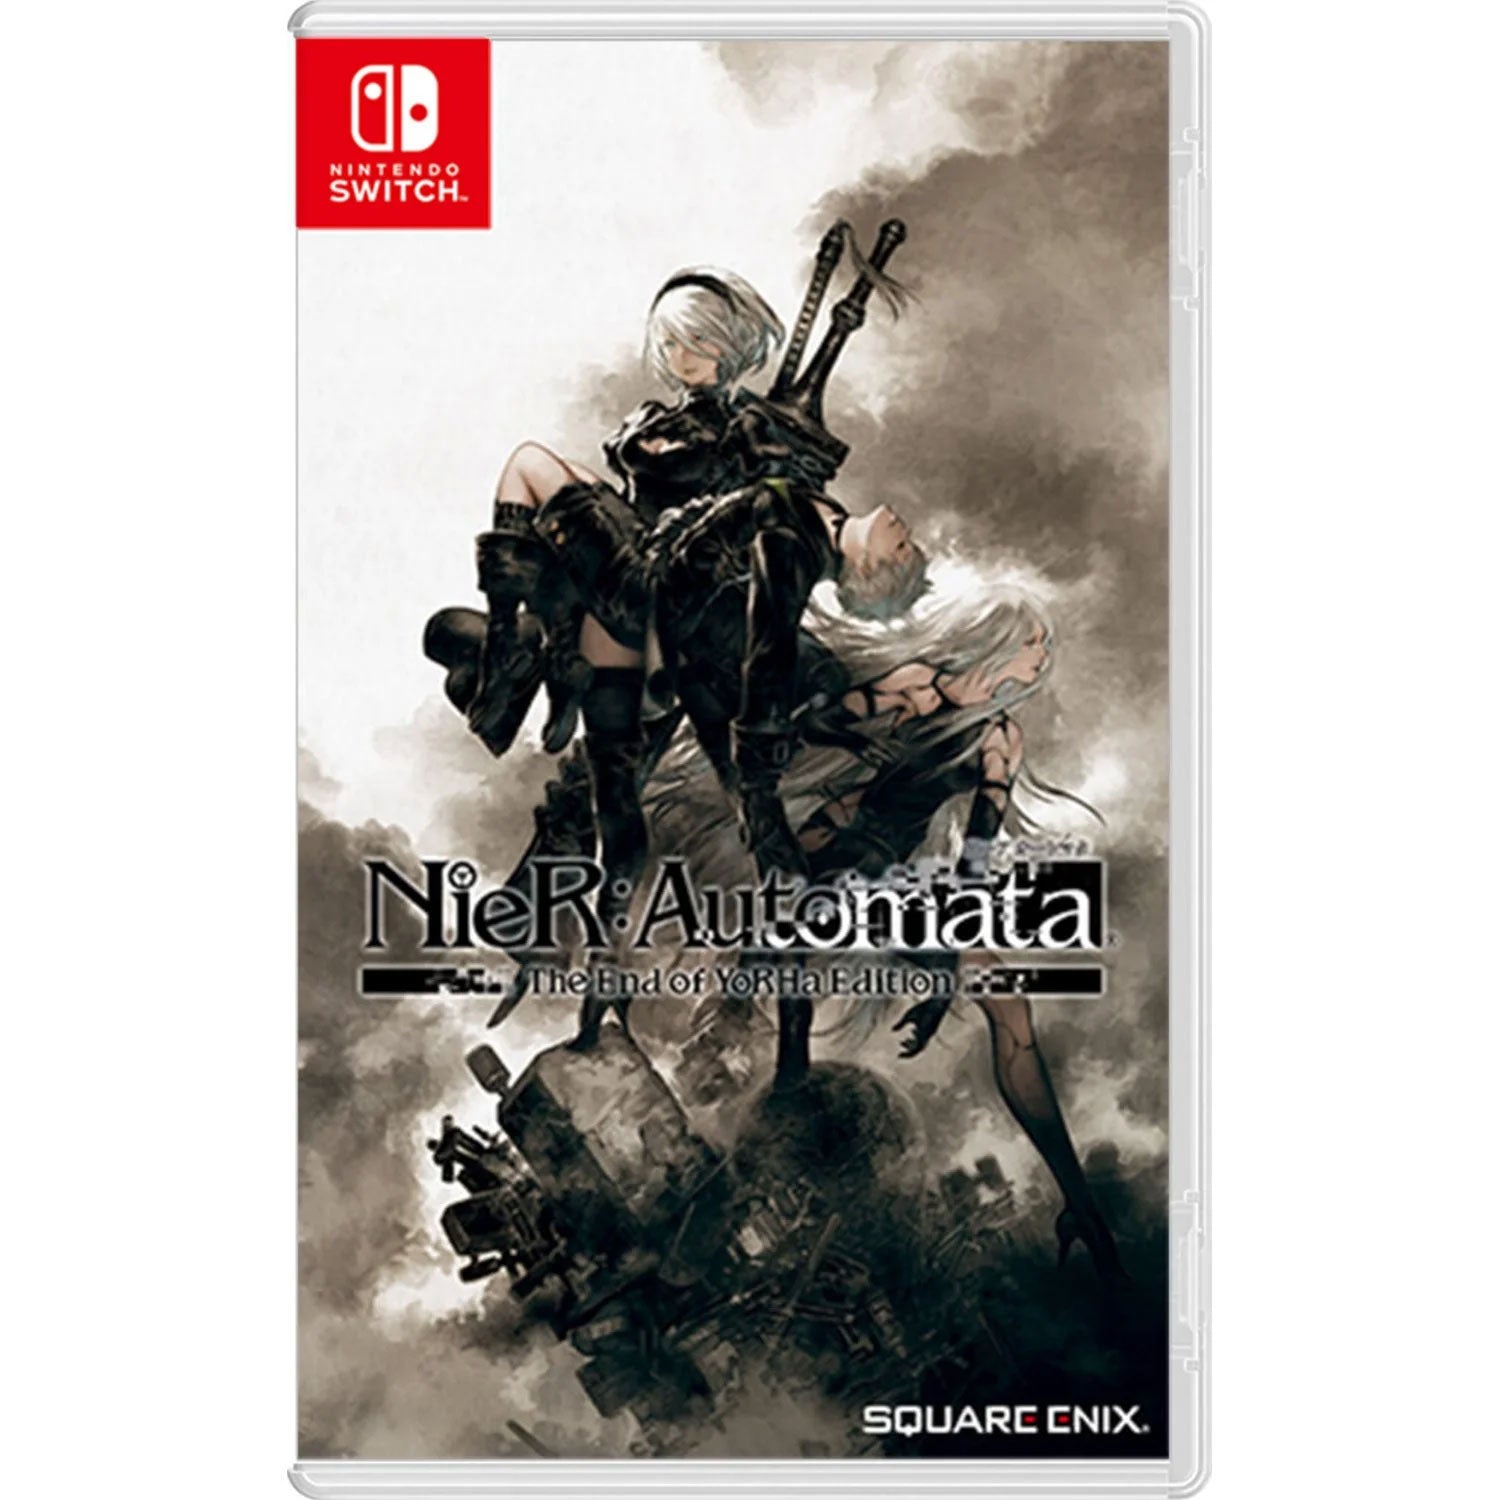 Nier Automata coming to Nintendo Switch in October - Polygon